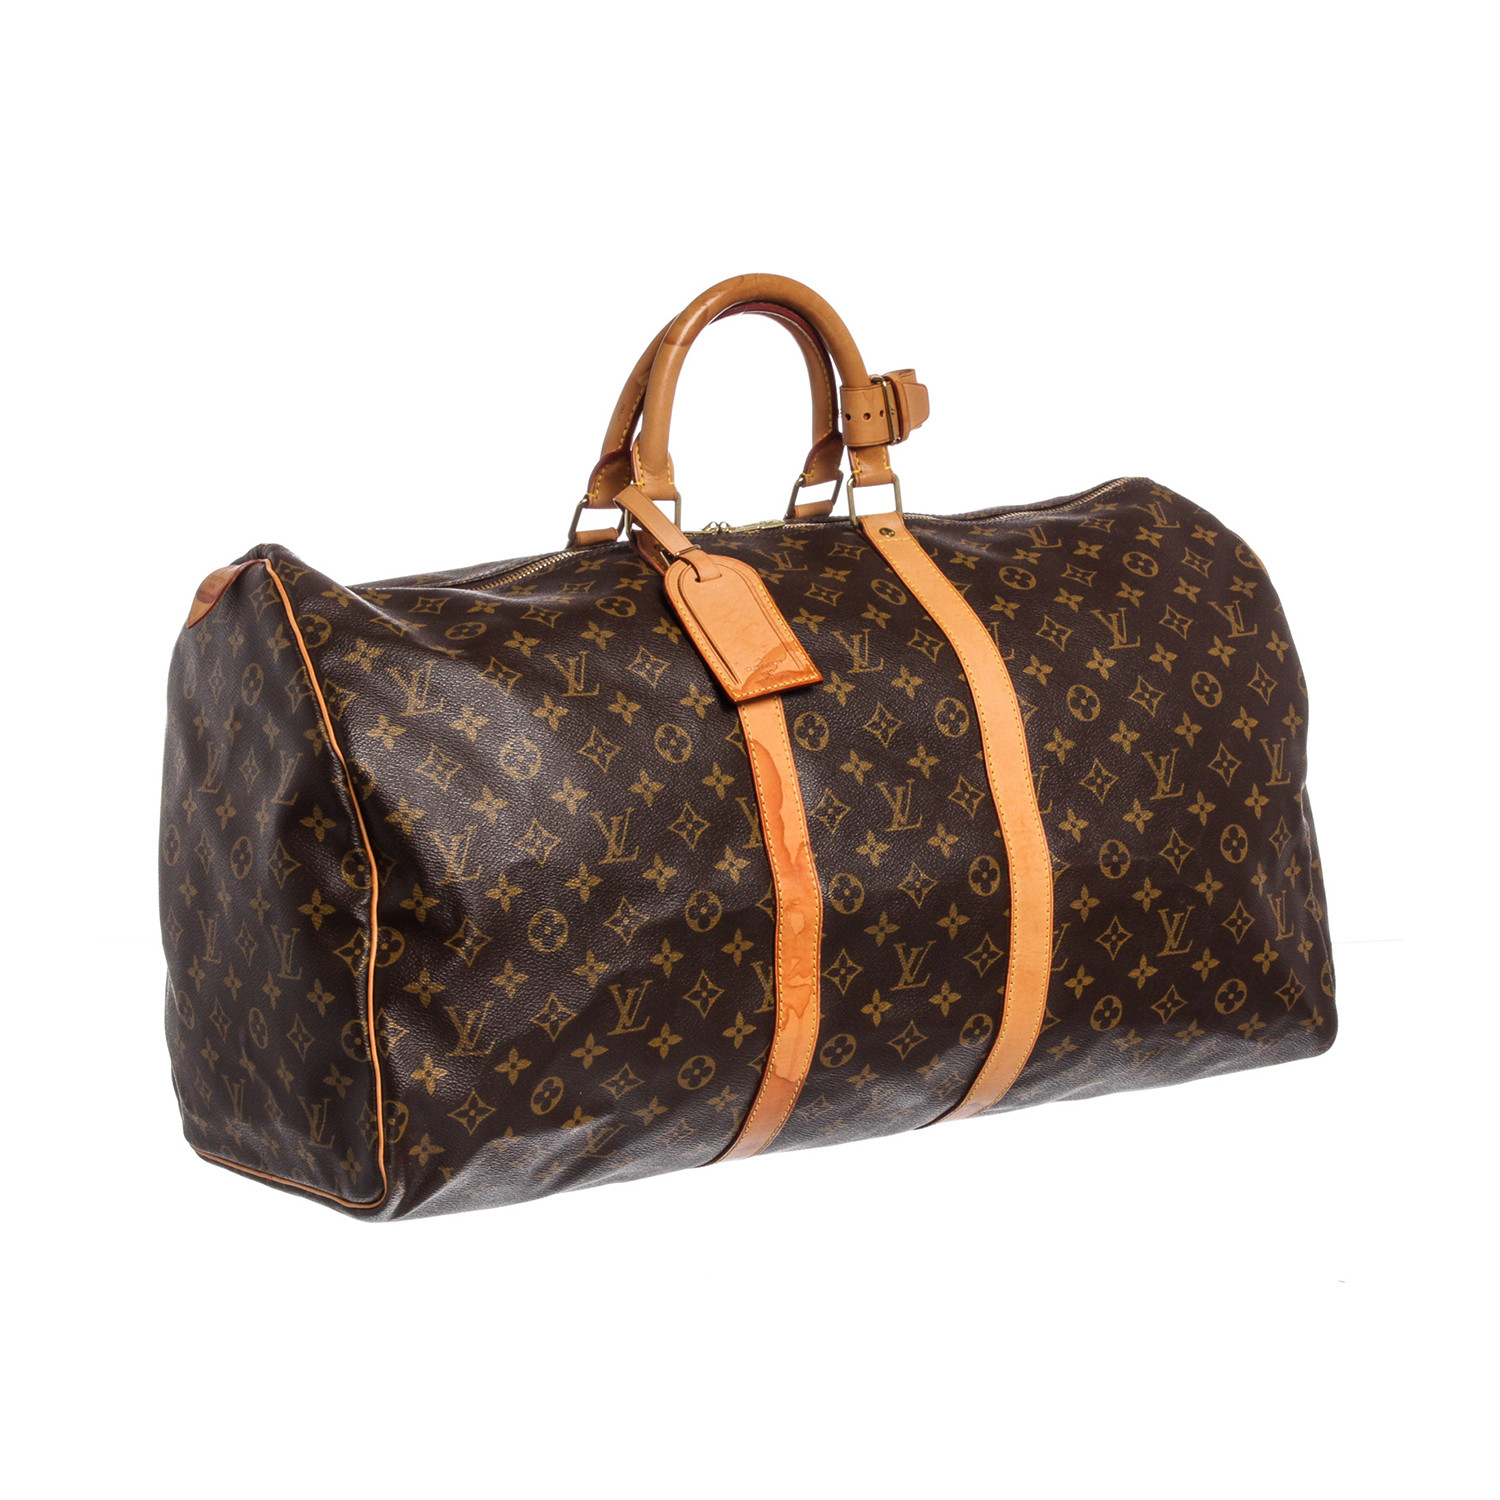 Louis Vuitton // Monogram Canvas Leather Keepall 55 cm Duffle Bag Luggage // FL0062 // Pre-Owned ...